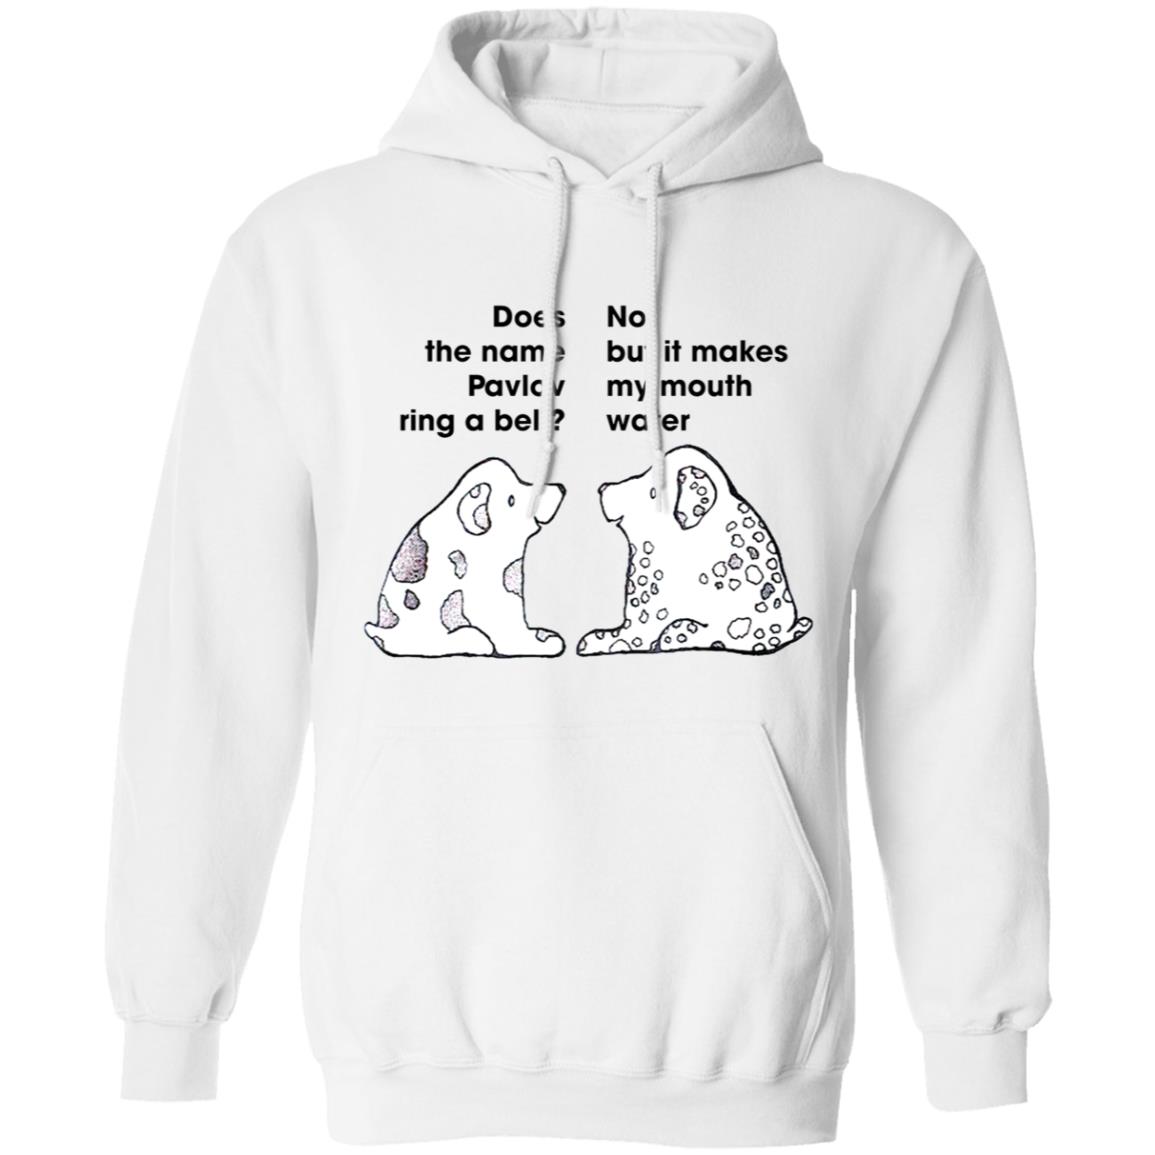 Dog Does The Name Pavlov Ring A Bell No But It Makes My Mouth Water Shirt 1